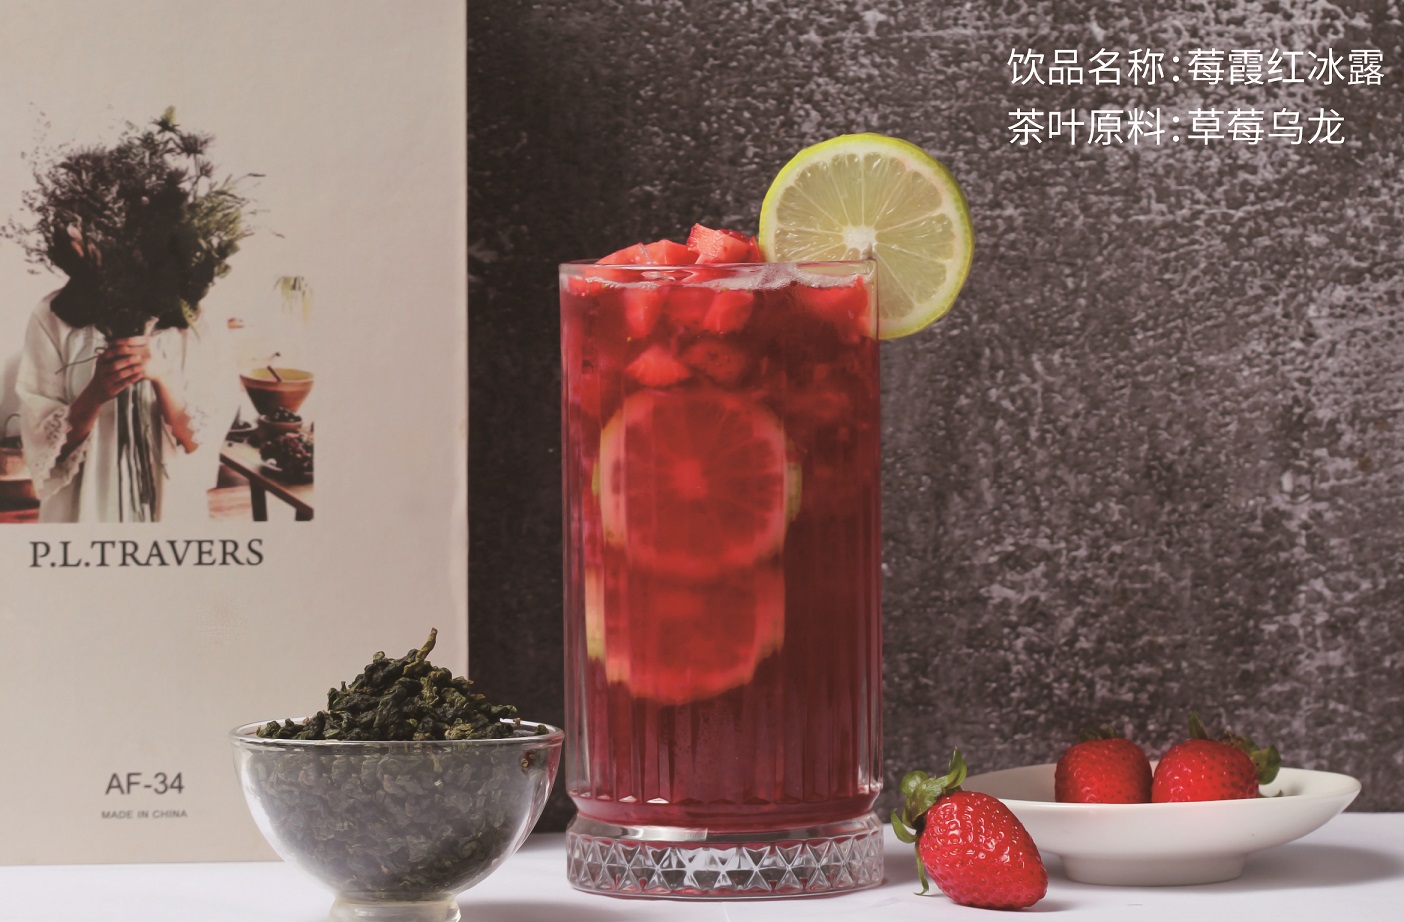 Beat the scorching Thursday heat with a Berry Passion Lychee drink